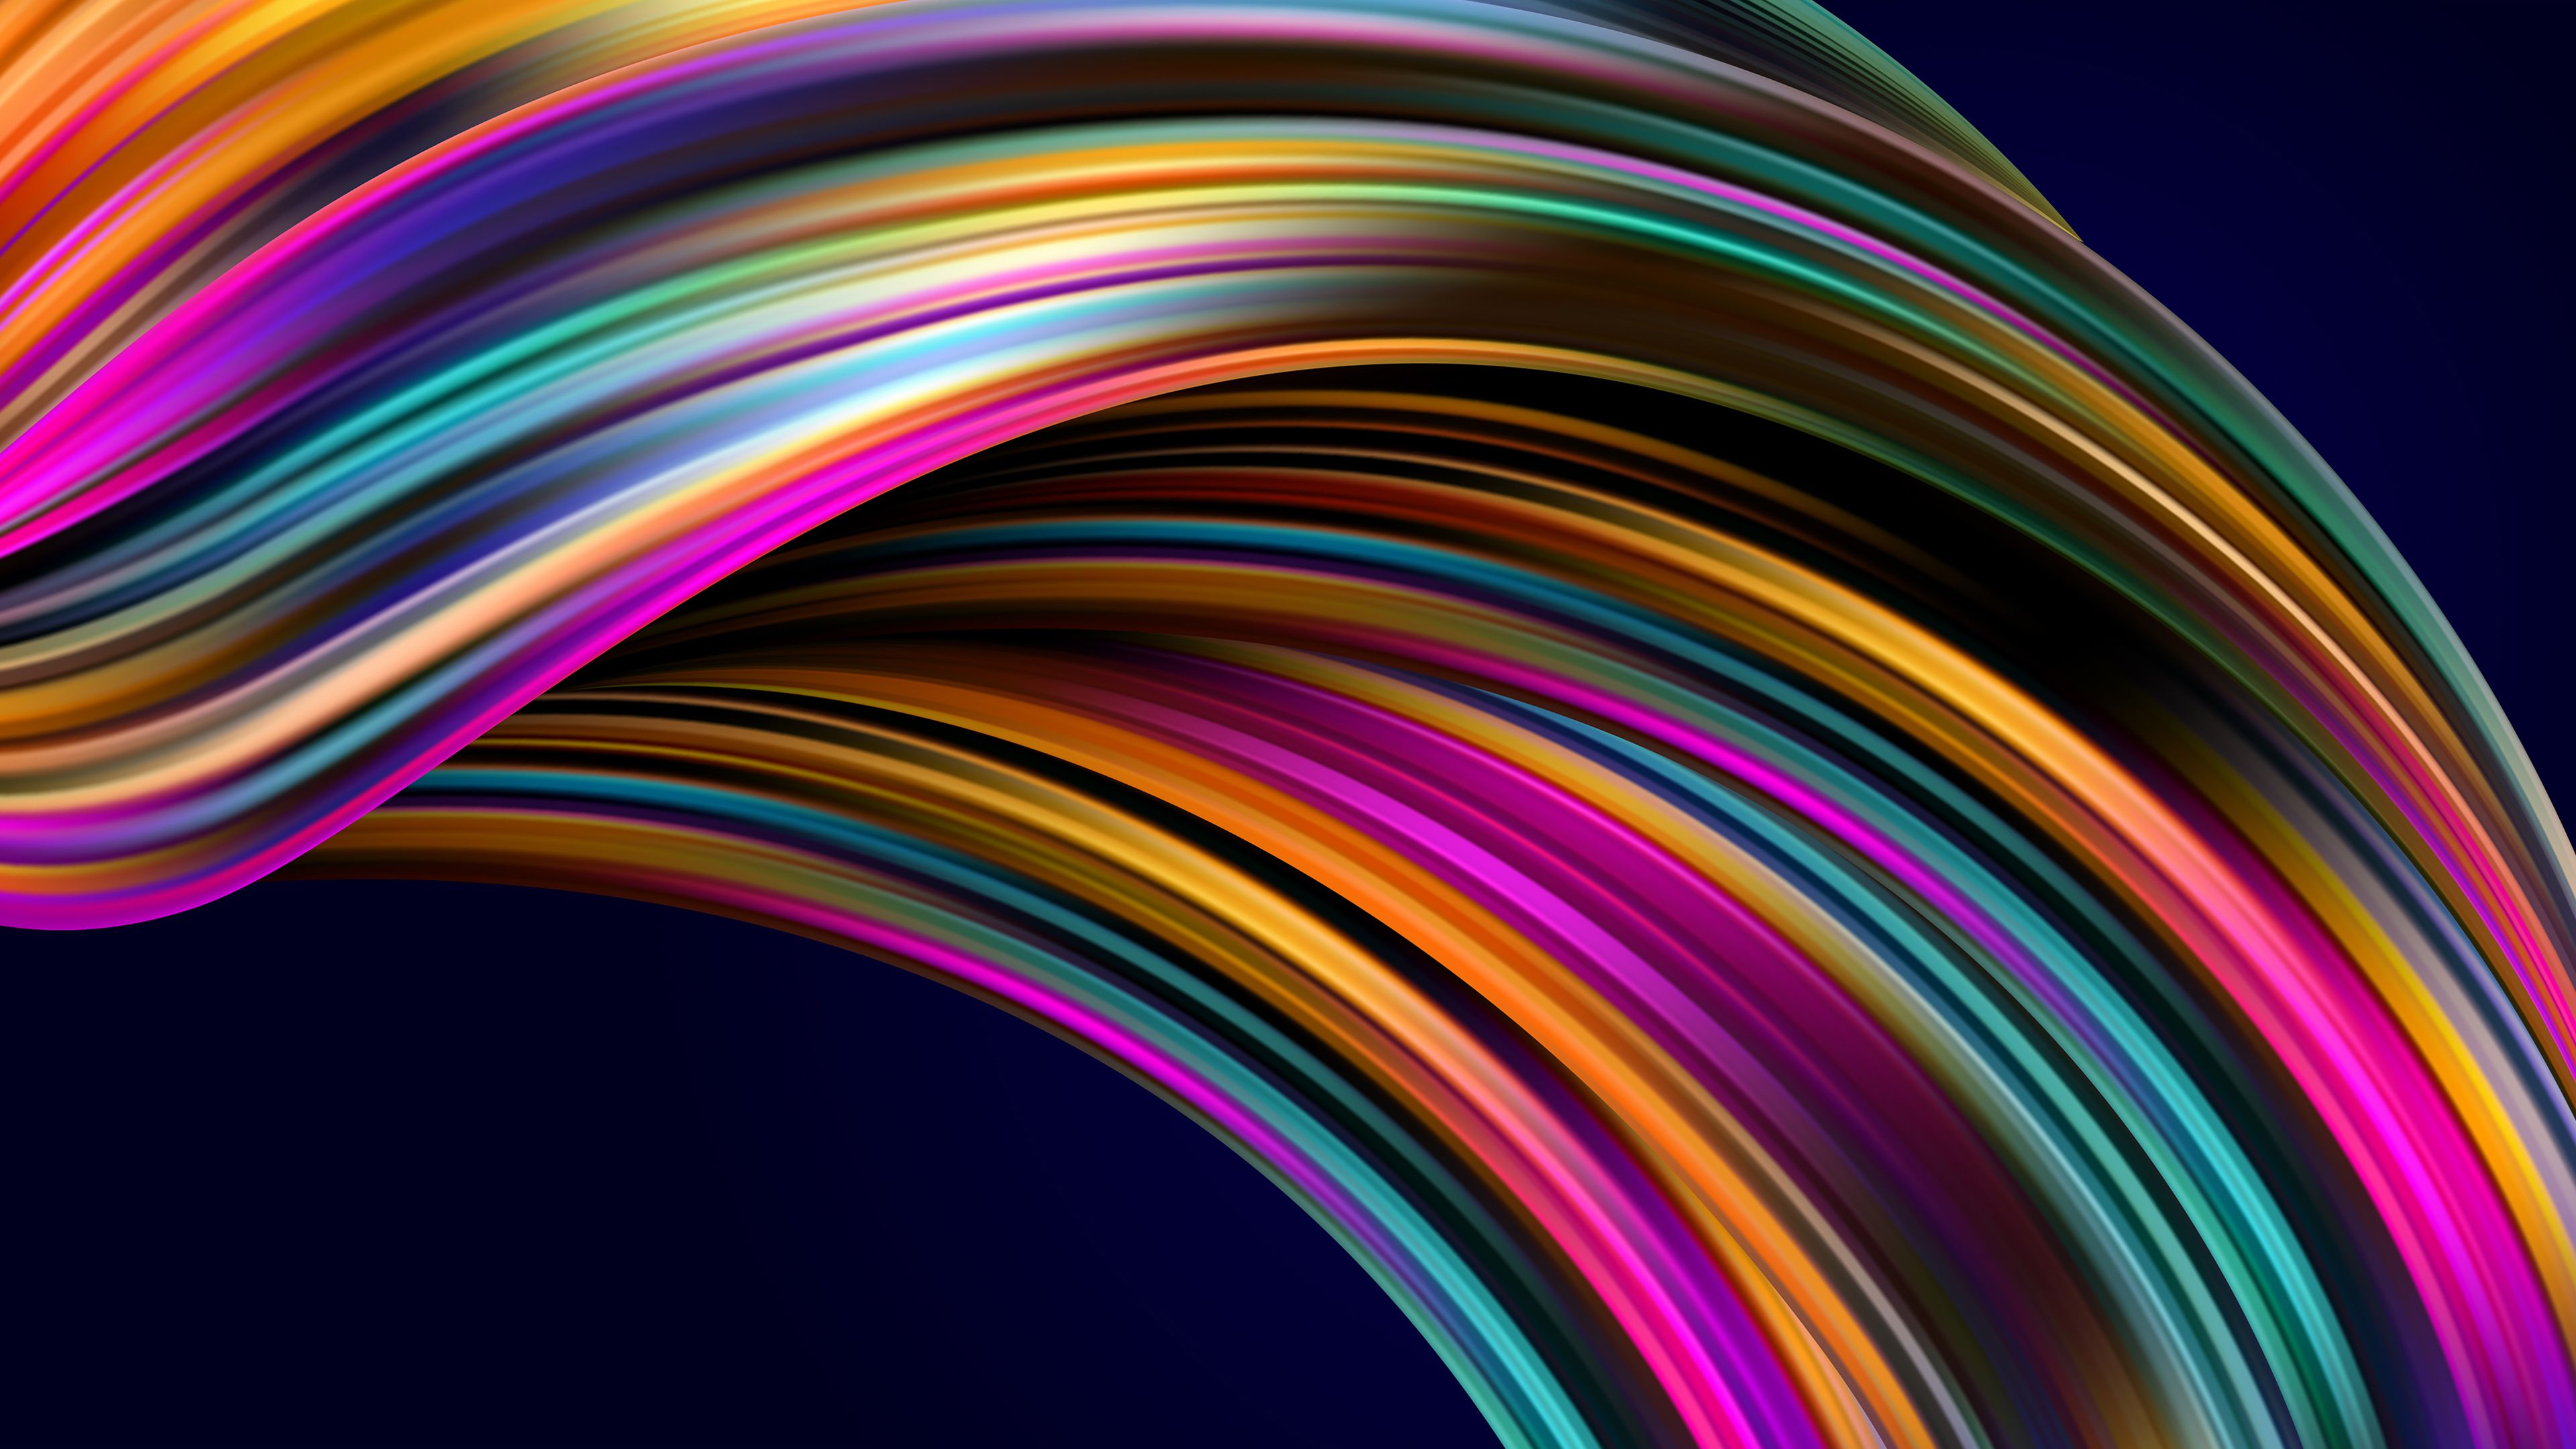 ASUS ZenBook Pro Duo 4K Wallpaper, Spectrum, Waves, Colorful, Stock, Abstract Search Results